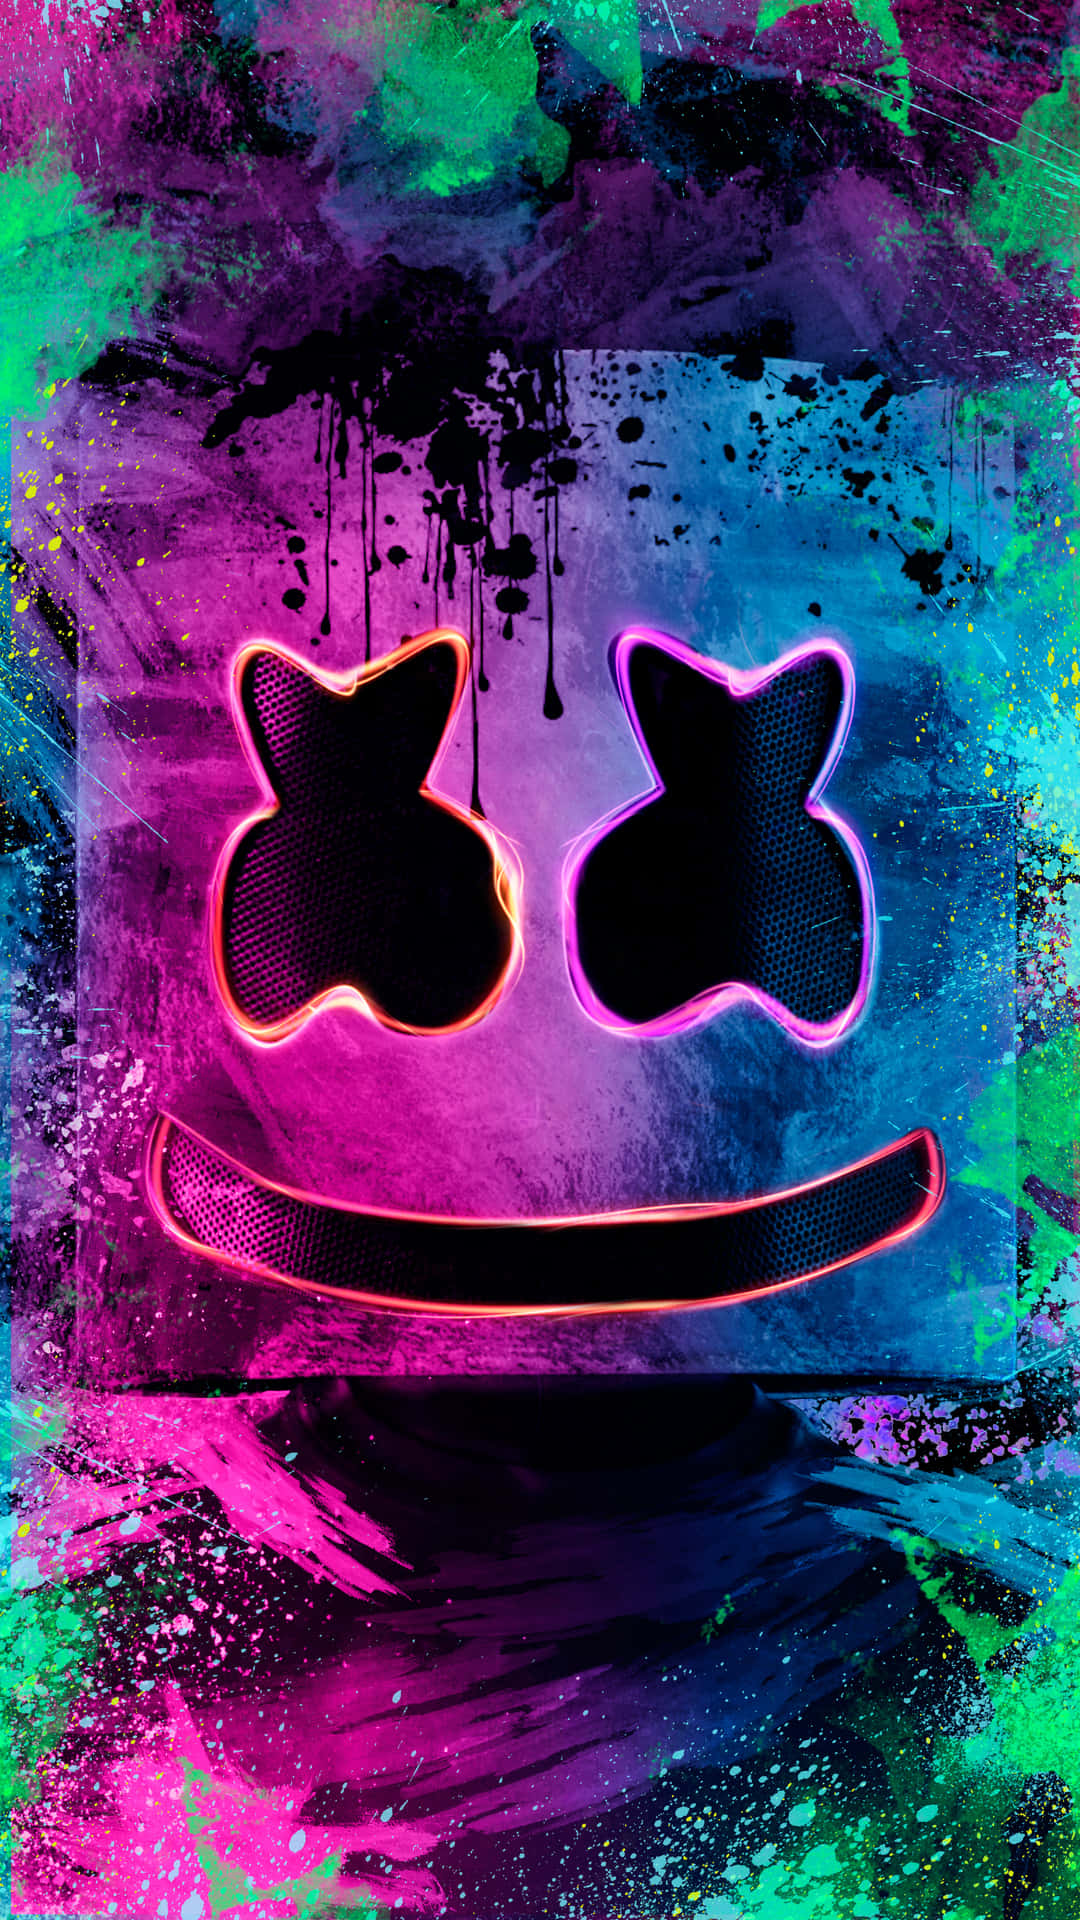 Brighten Up Your Iphone Screen with This Glowing Neon Marshmallo Design Wallpaper